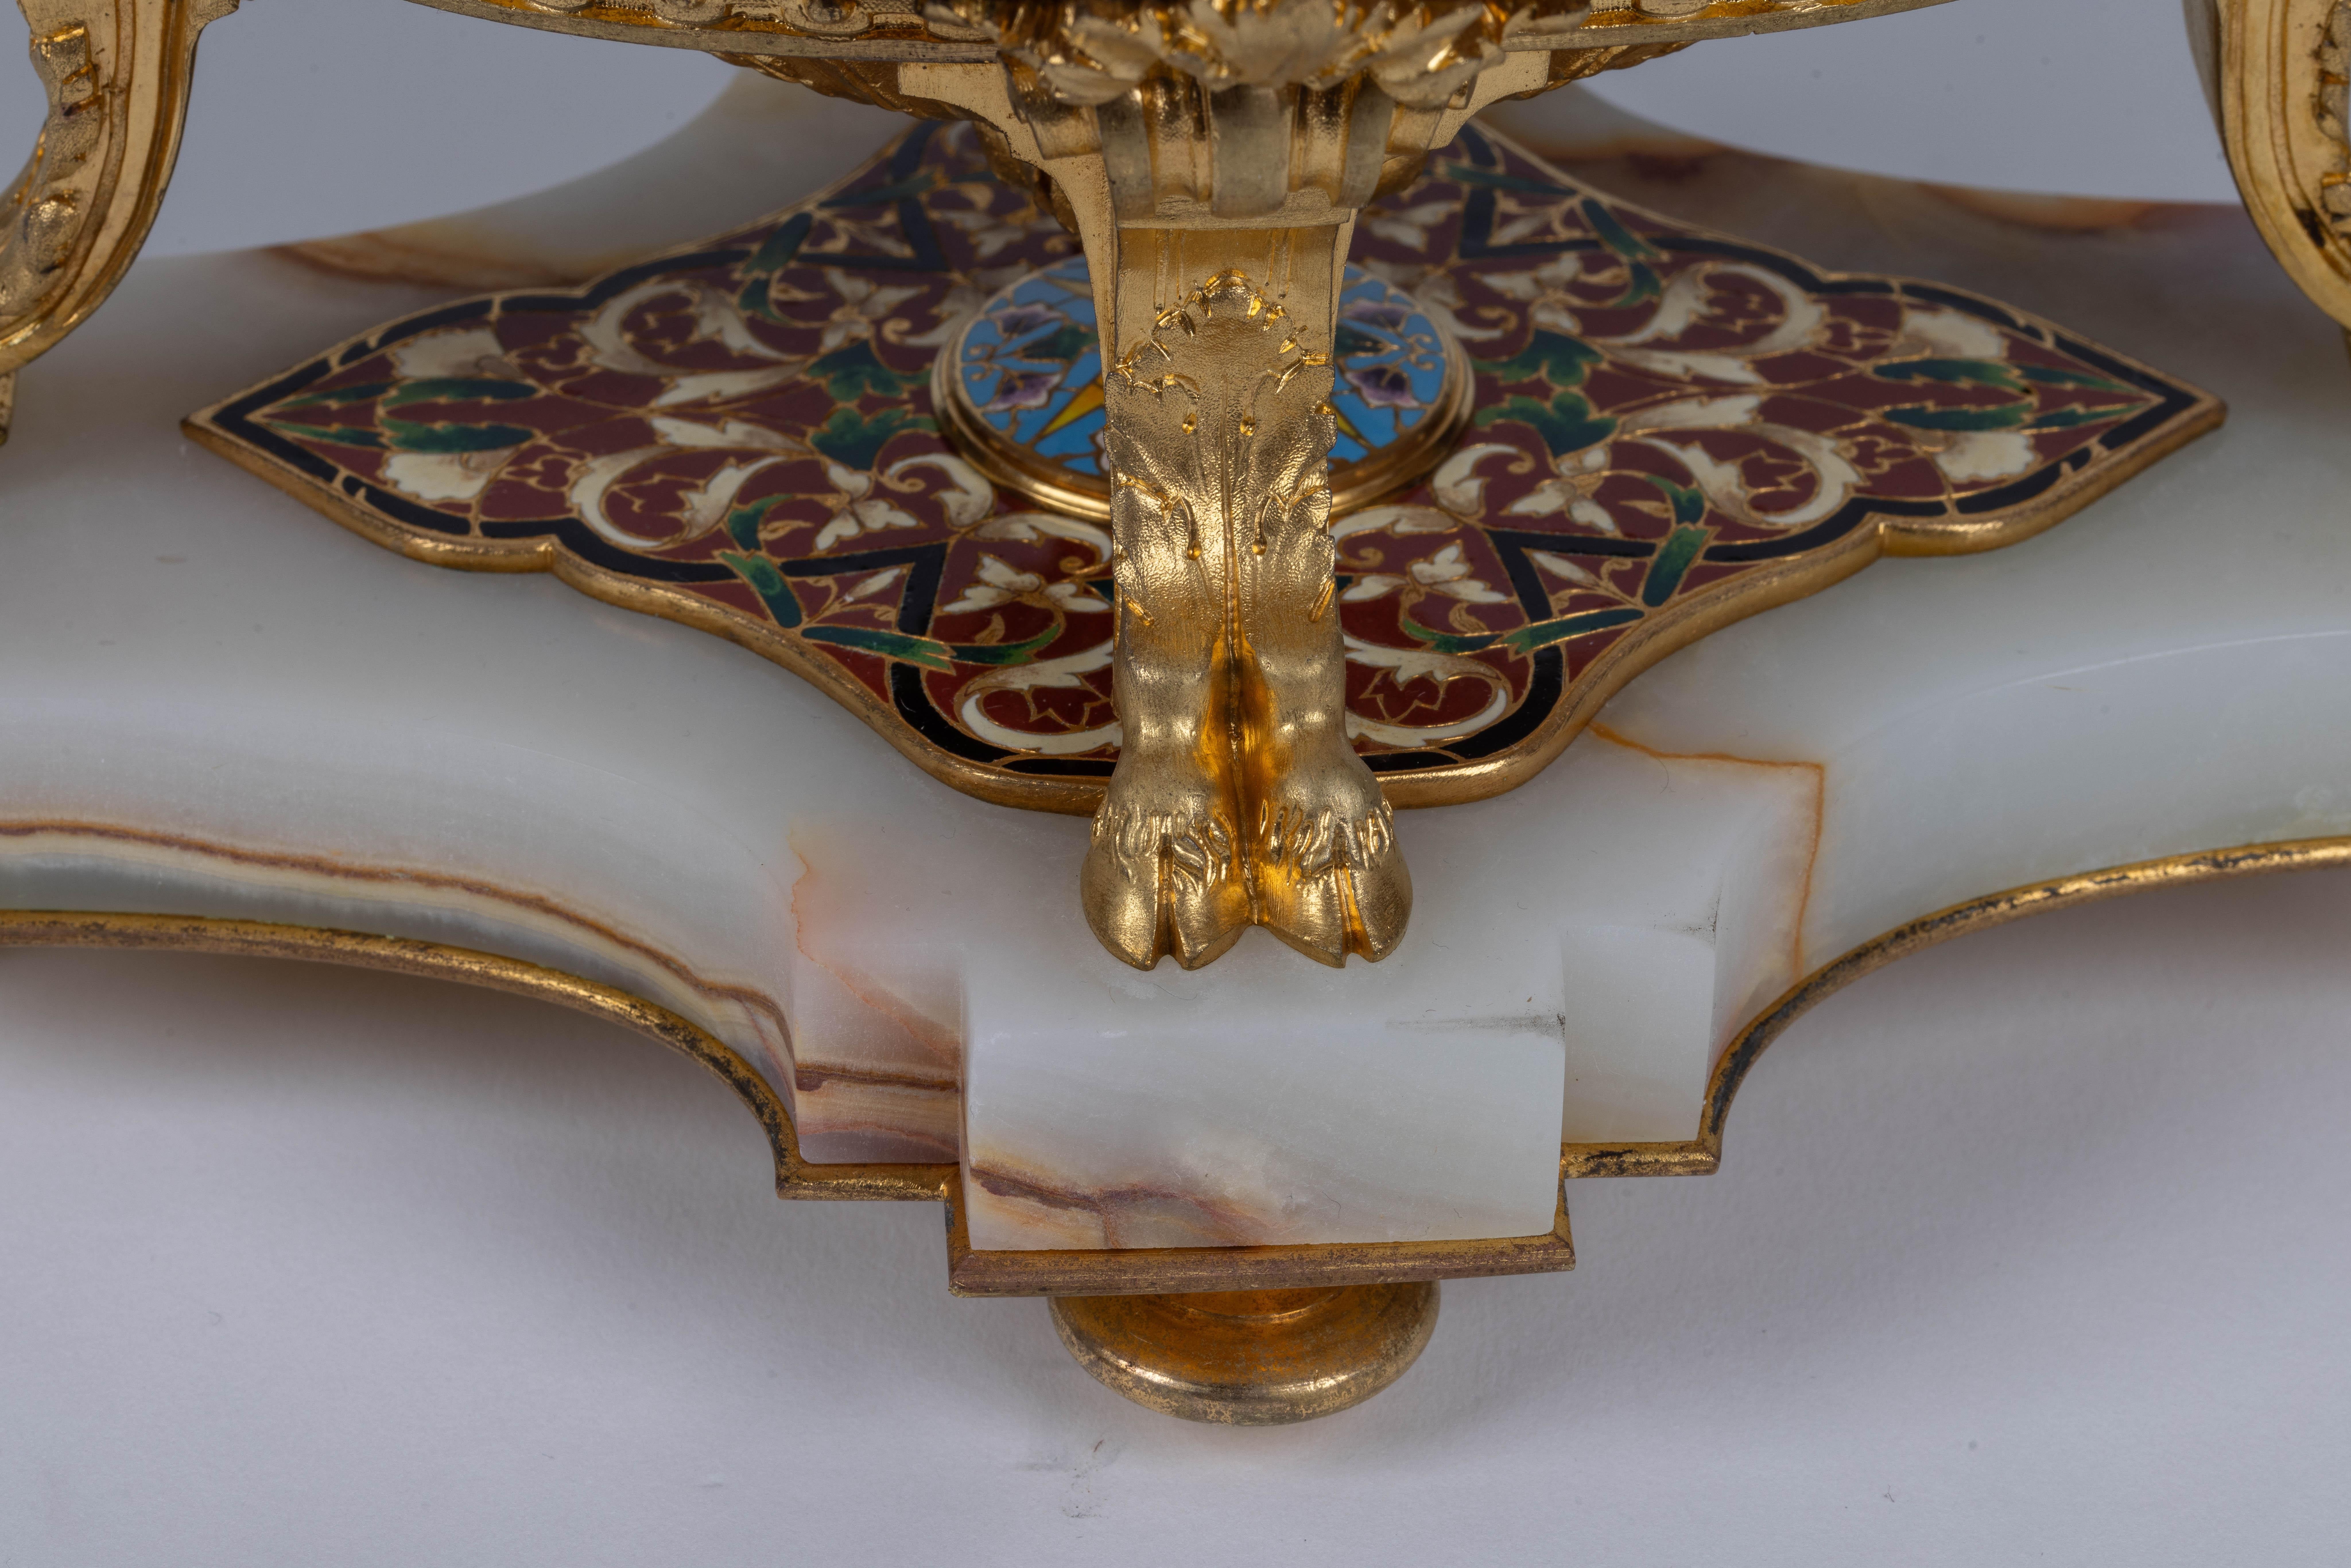 19th Century A Fine French Ormolu, Champleve Enamel, and Onyx Figural Centerpiece Jardiniere For Sale